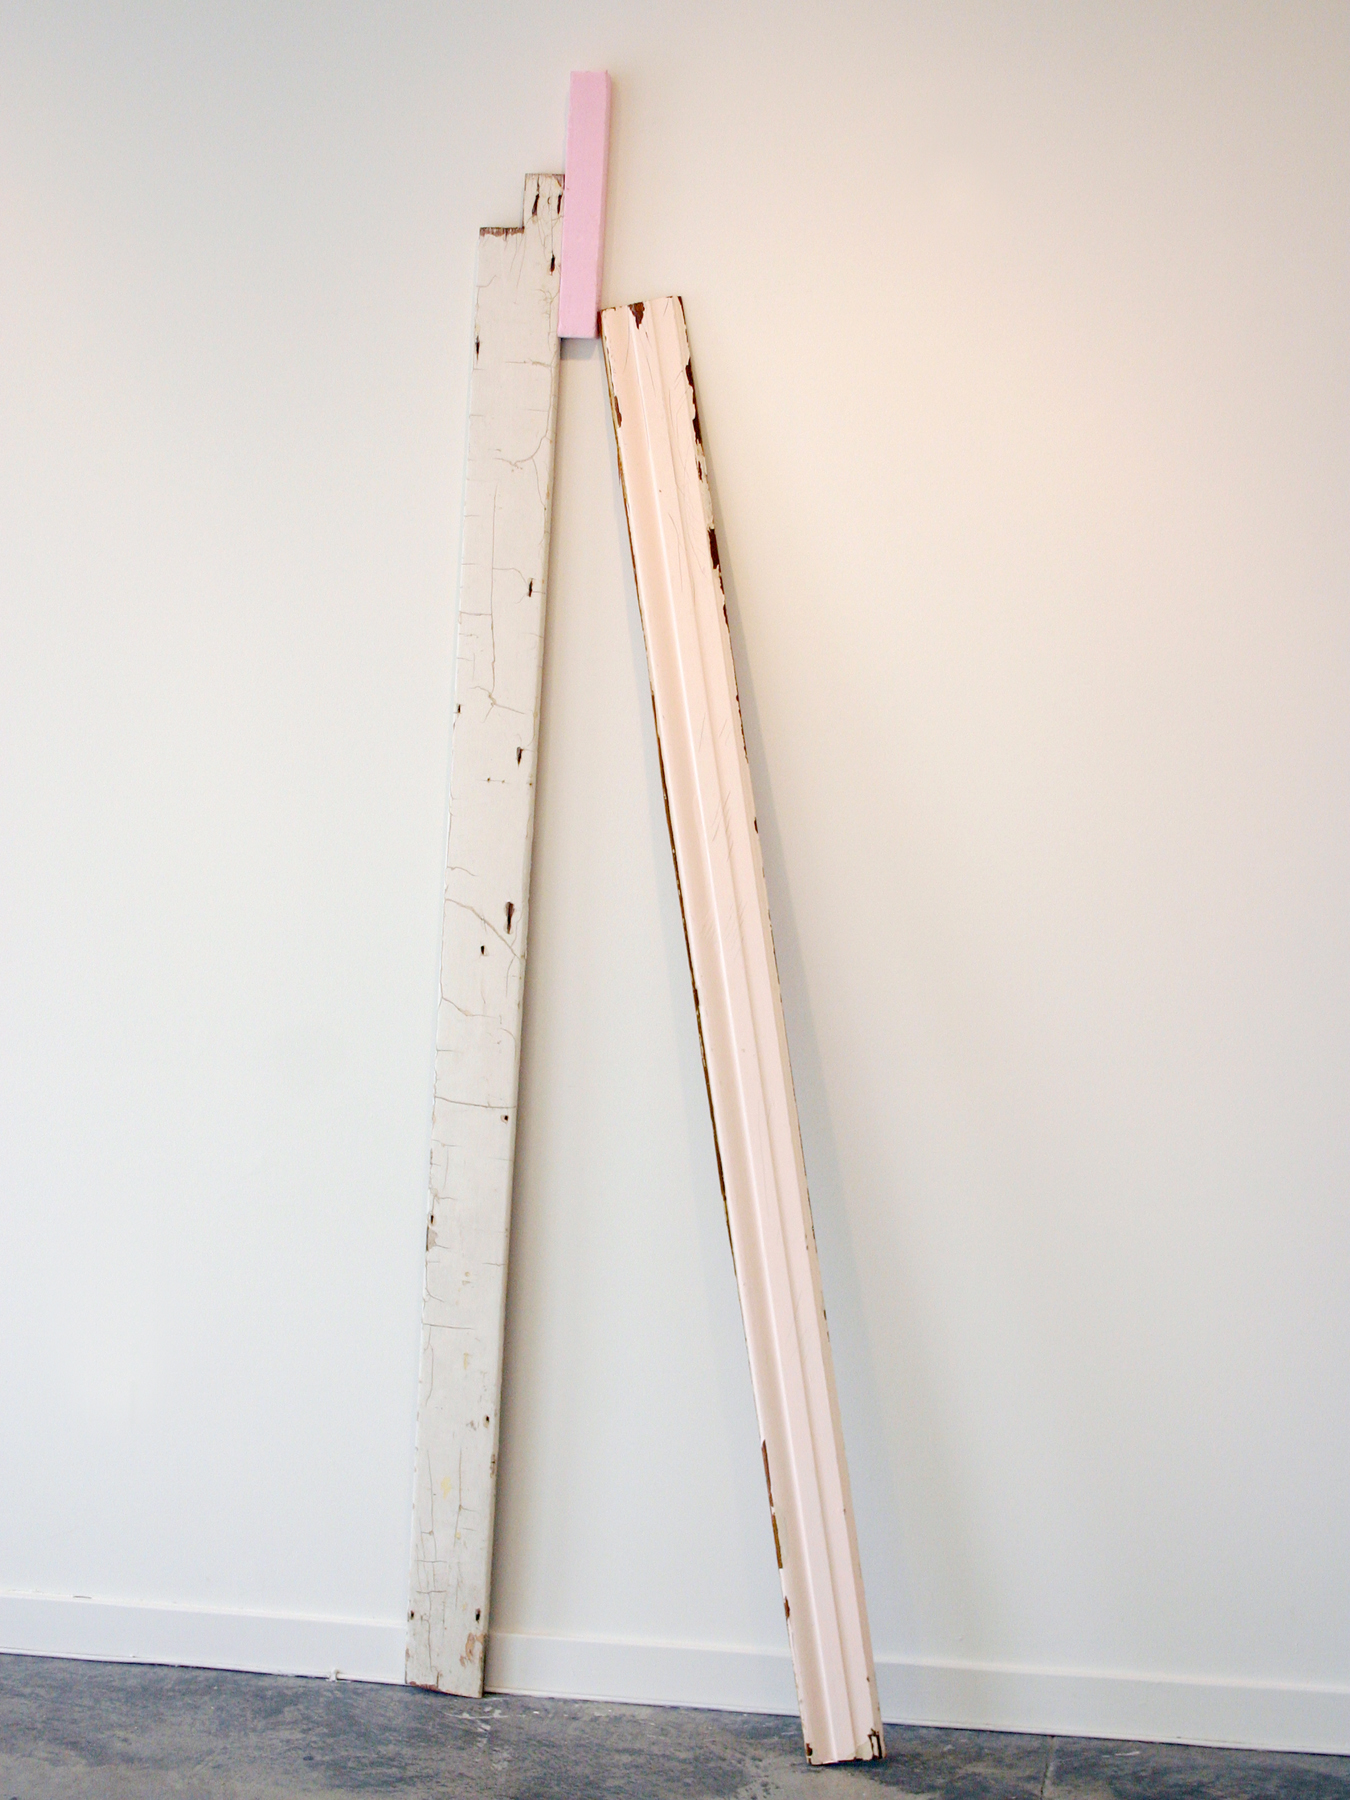   KIRK STOLLER   Untitled (trapezoid),&nbsp; wood and foam, 82.75" x 27" x 6", 2011 